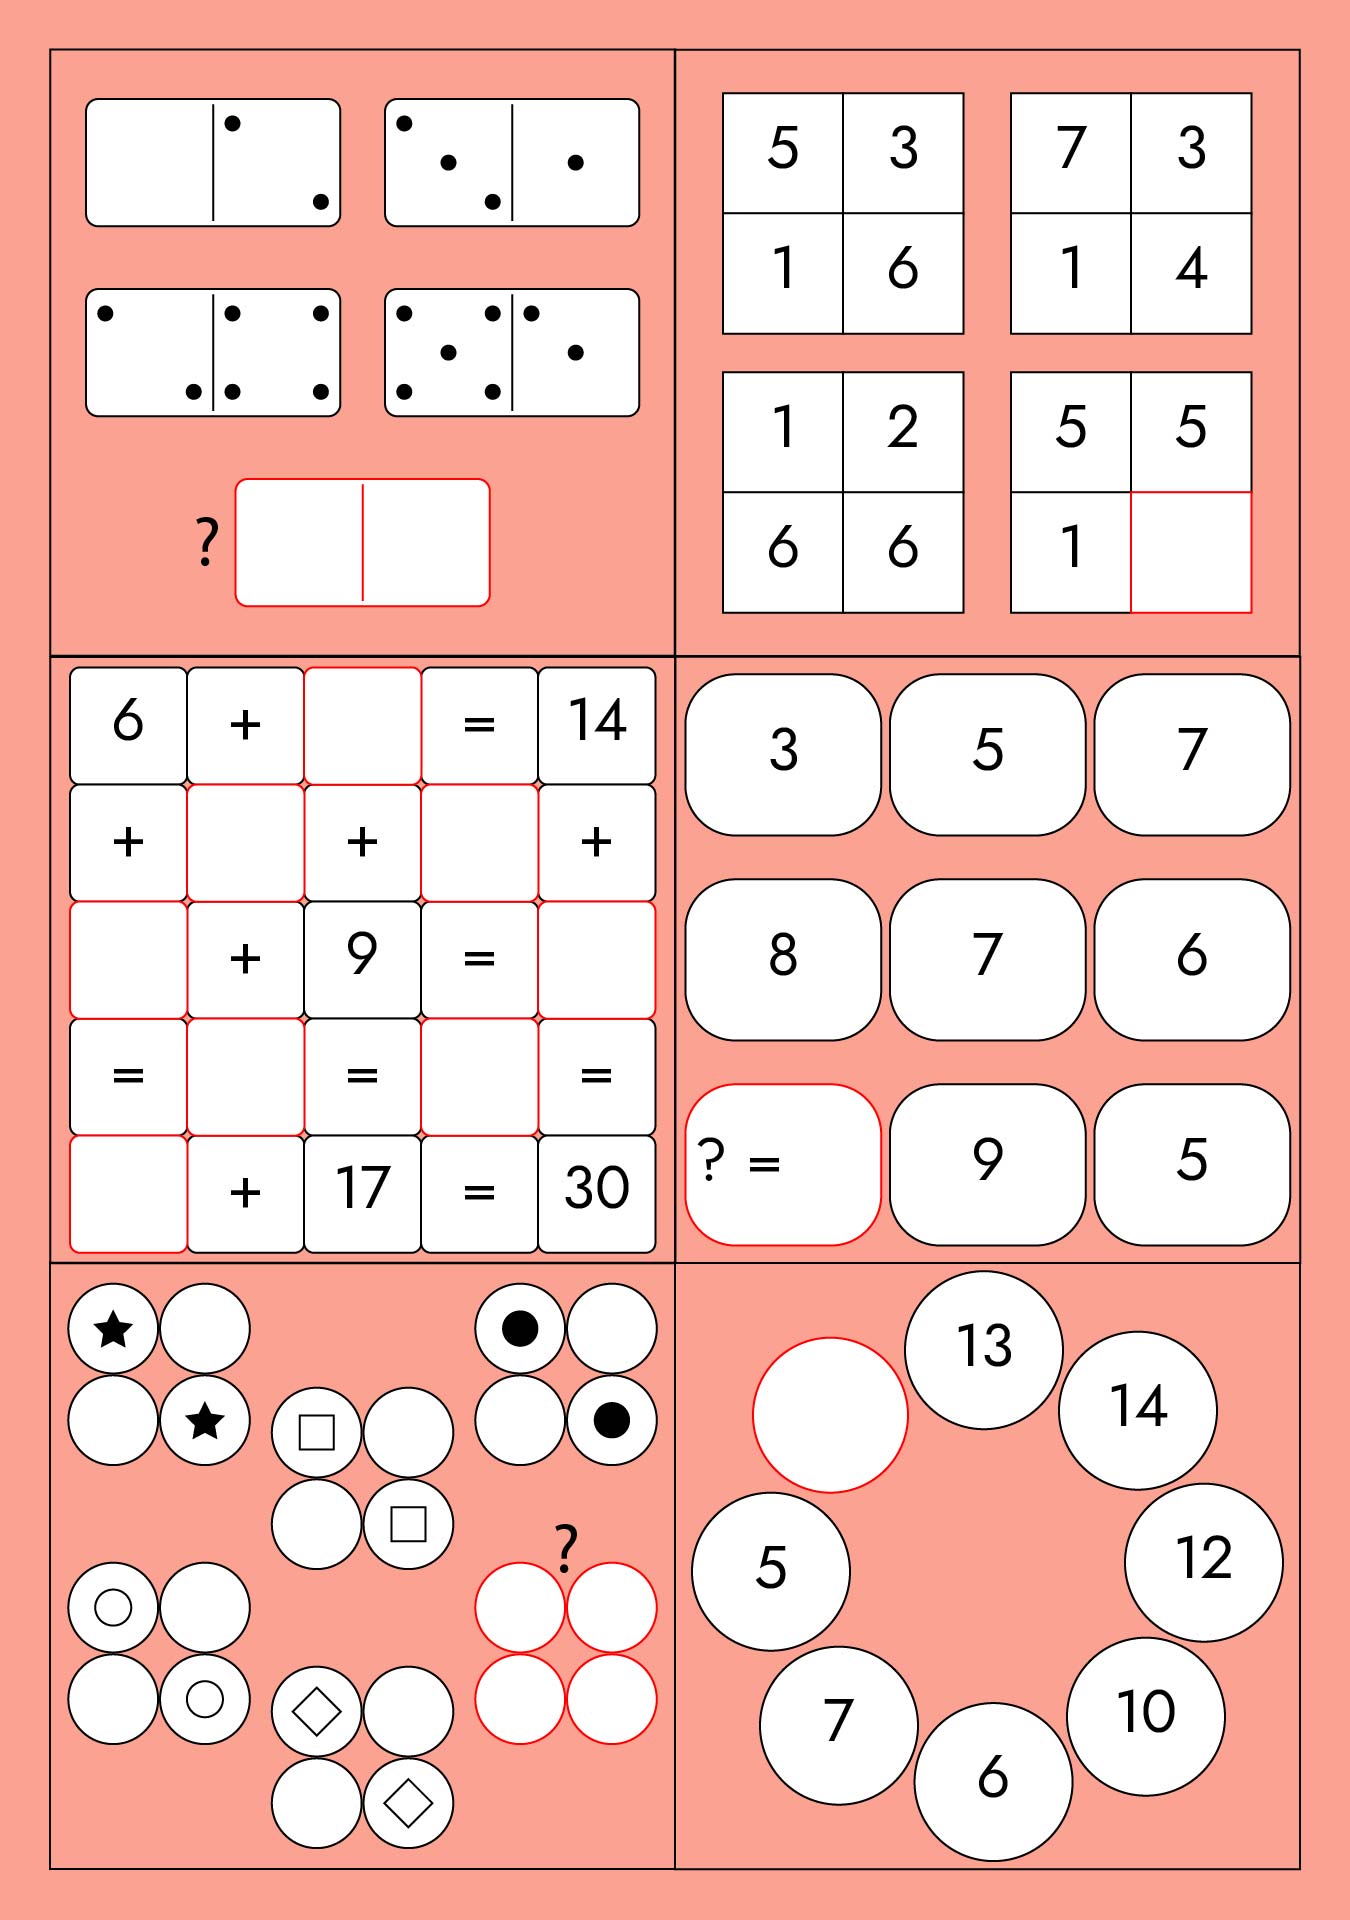 Printable Math Brain Teasers, Shape Patterns And IQ Puzzles For Kids And Math Students